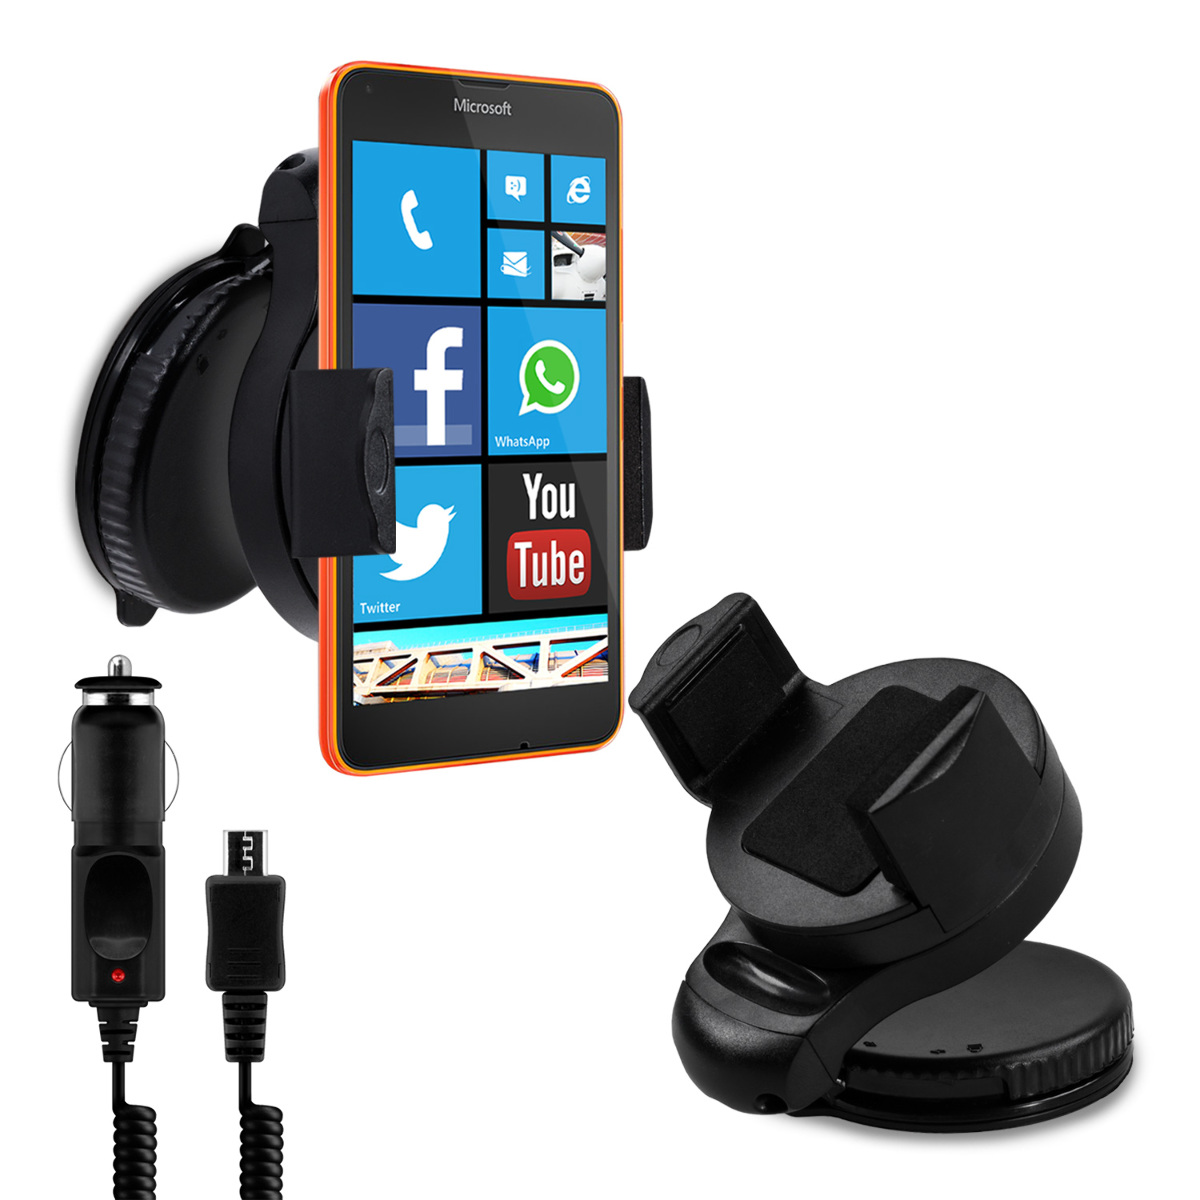 kwmobile WIND SHIELD CAR HOLDER FOR MICROSOFT LUMIA 640 + CHARGER 